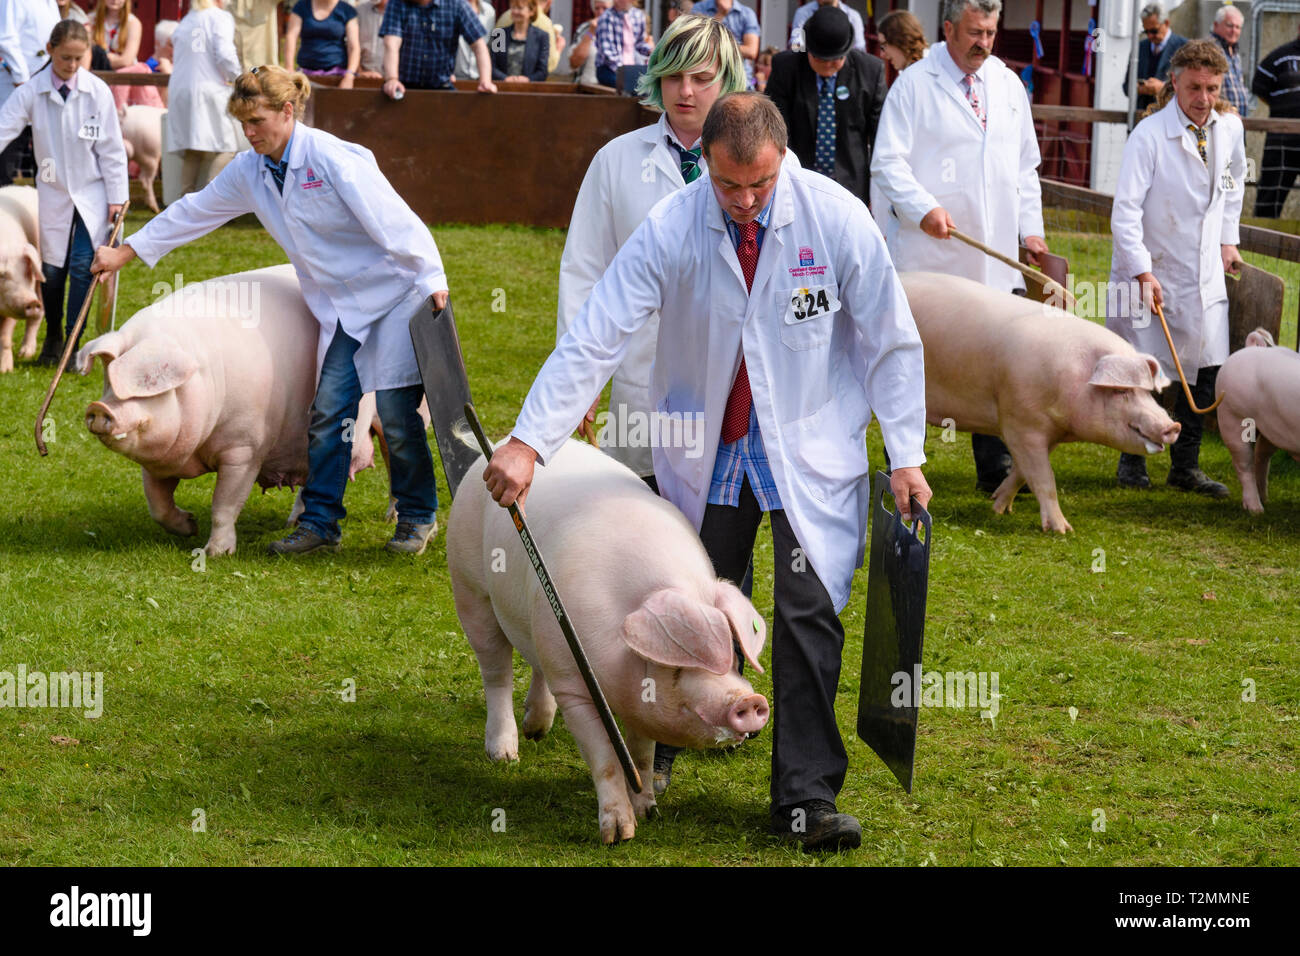 White pigs & handlers using sticks & boards, walking & parading in arena watched by judge & crowd - The Great Yorkshire Show, Harrogate, England, UK. Stock Photo